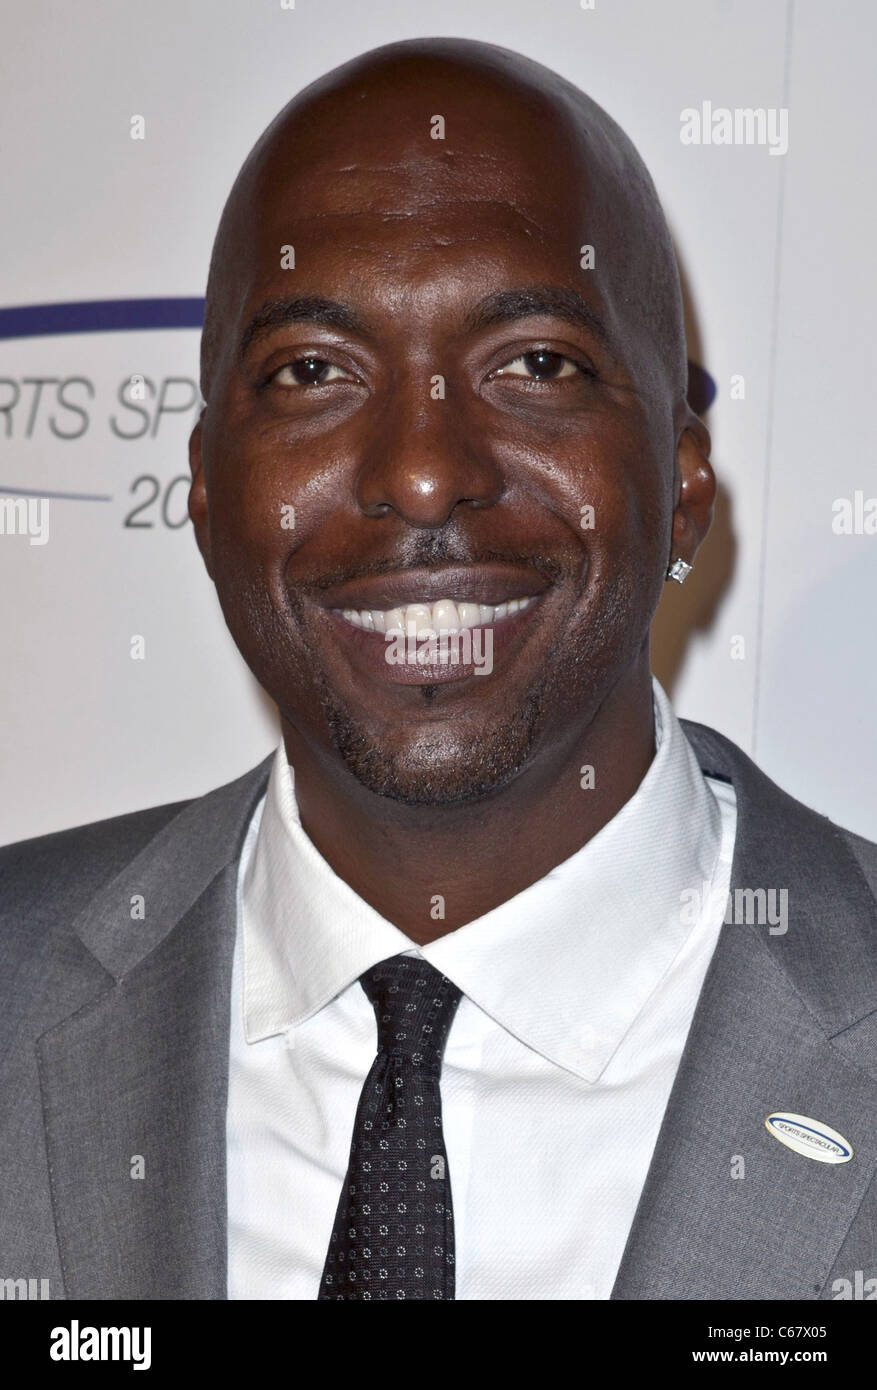 John Salley at arrivals for 26th Anniversary Sports Spectacular, Hyatt Regency Century Plaza Hotel, Los Angeles, CA May 22, 2011. Photo By: Emiley Schweich/Everett Collection Stock Photo